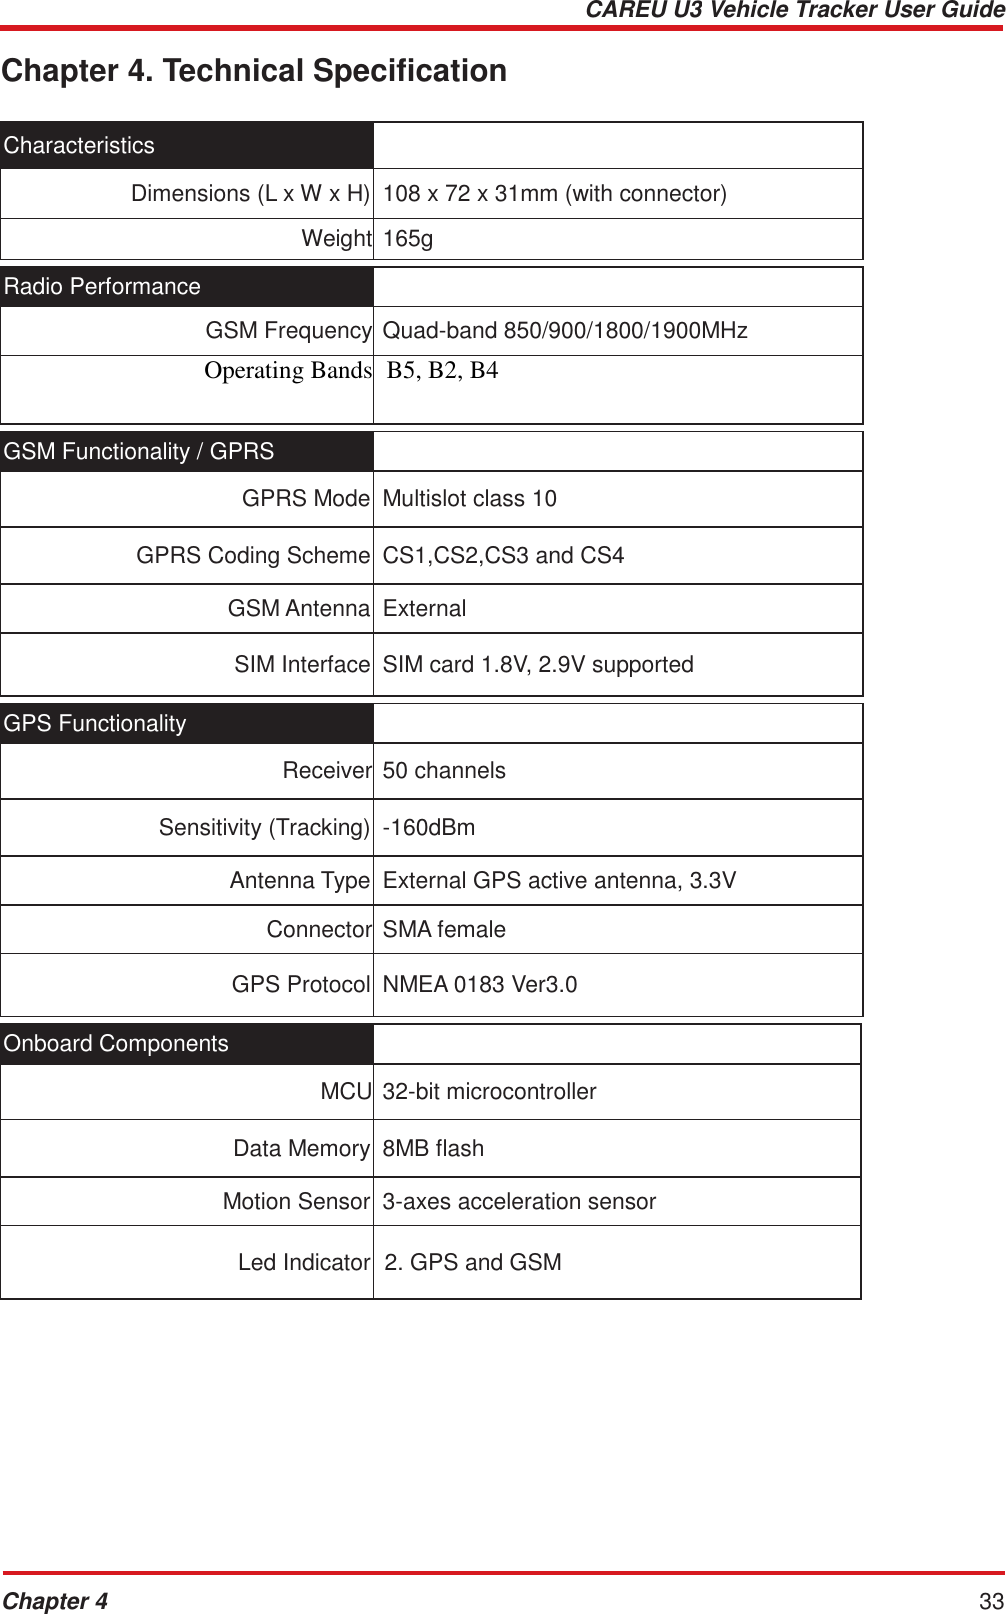 CAREU U3 Vehicle Tracker User Guide Chapter 4 33    Chapter 4. Technical Specification   Characteristics   Dimensions (L x W x H)  108 x 72 x 31mm (with connector) Weight 165g  Radio Performance  GSM Frequency Quad-band 850/900/1800/1900MHz Operating BandsB5, B2, B4  GSM Functionality / GPRS   GPRS Mode  Multislot class 10  GPRS Coding Scheme  CS1,CS2,CS3 and CS4 GSM Antenna External  SIM Interface  SIM card 1.8V, 2.9V supported  GPS Functionality   Receiver 50 channels  Sensitivity (Tracking)  -160dBm Antenna Type External GPS active antenna, 3.3V ConnectorSMA female  GPS Protocol  NMEA 0183 Ver3.0  Onboard Components   MCU 32-bit microcontroller  Data Memory  8MB flash Motion Sensor 3-axes acceleration sensor  Led Indicator  2. GPS and GSM 